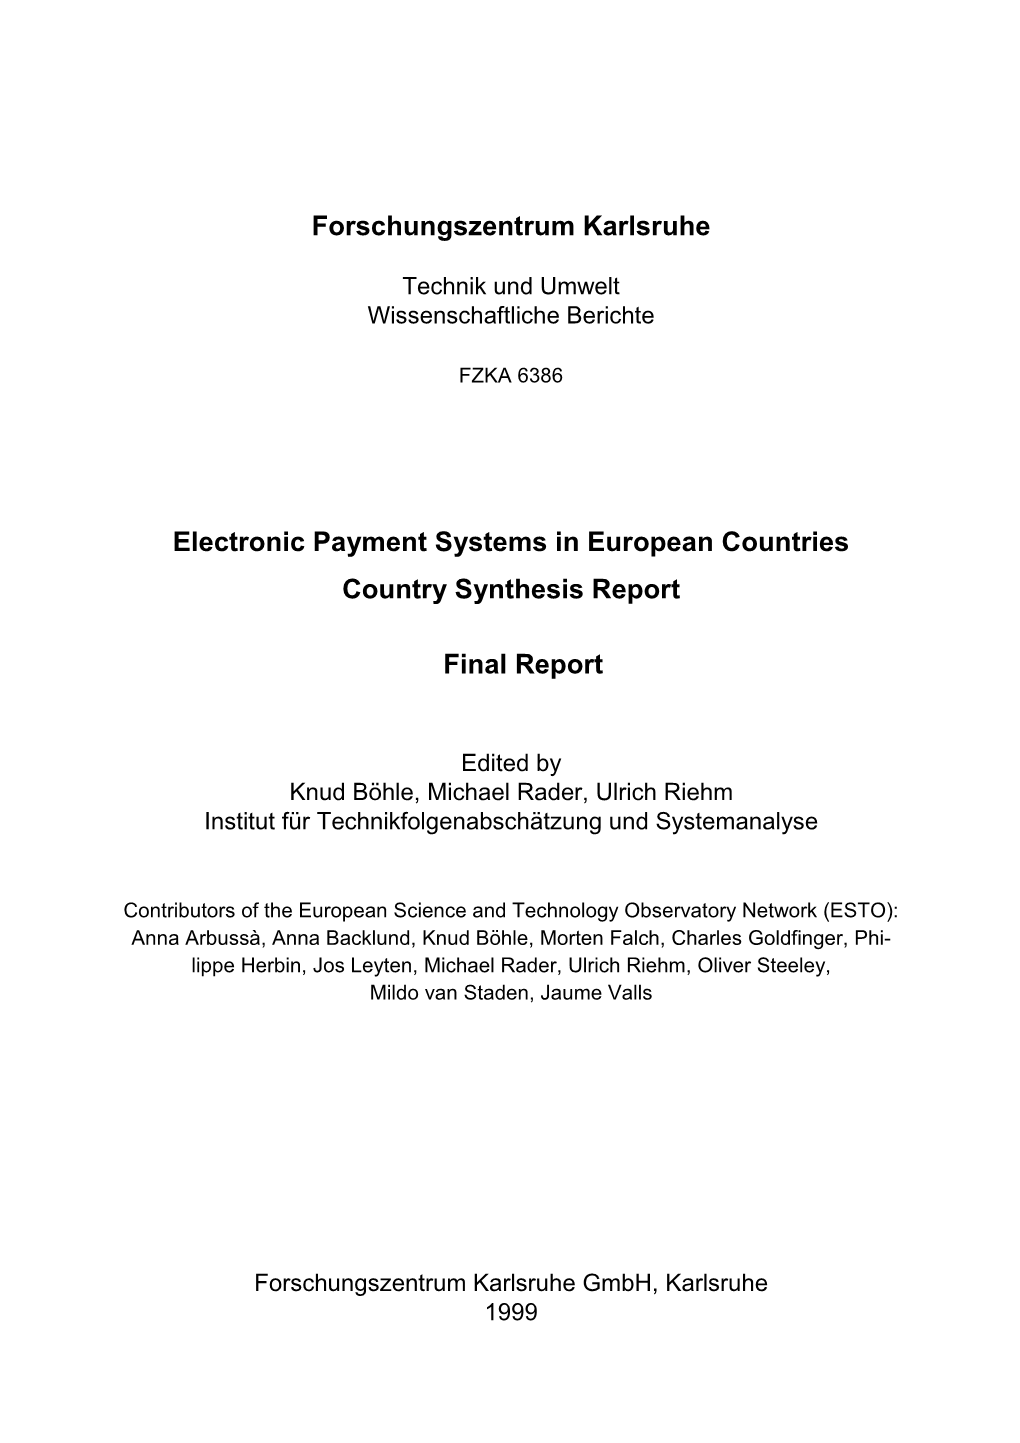 Electronic Payment Systems in European Countries Country Synthesis Report